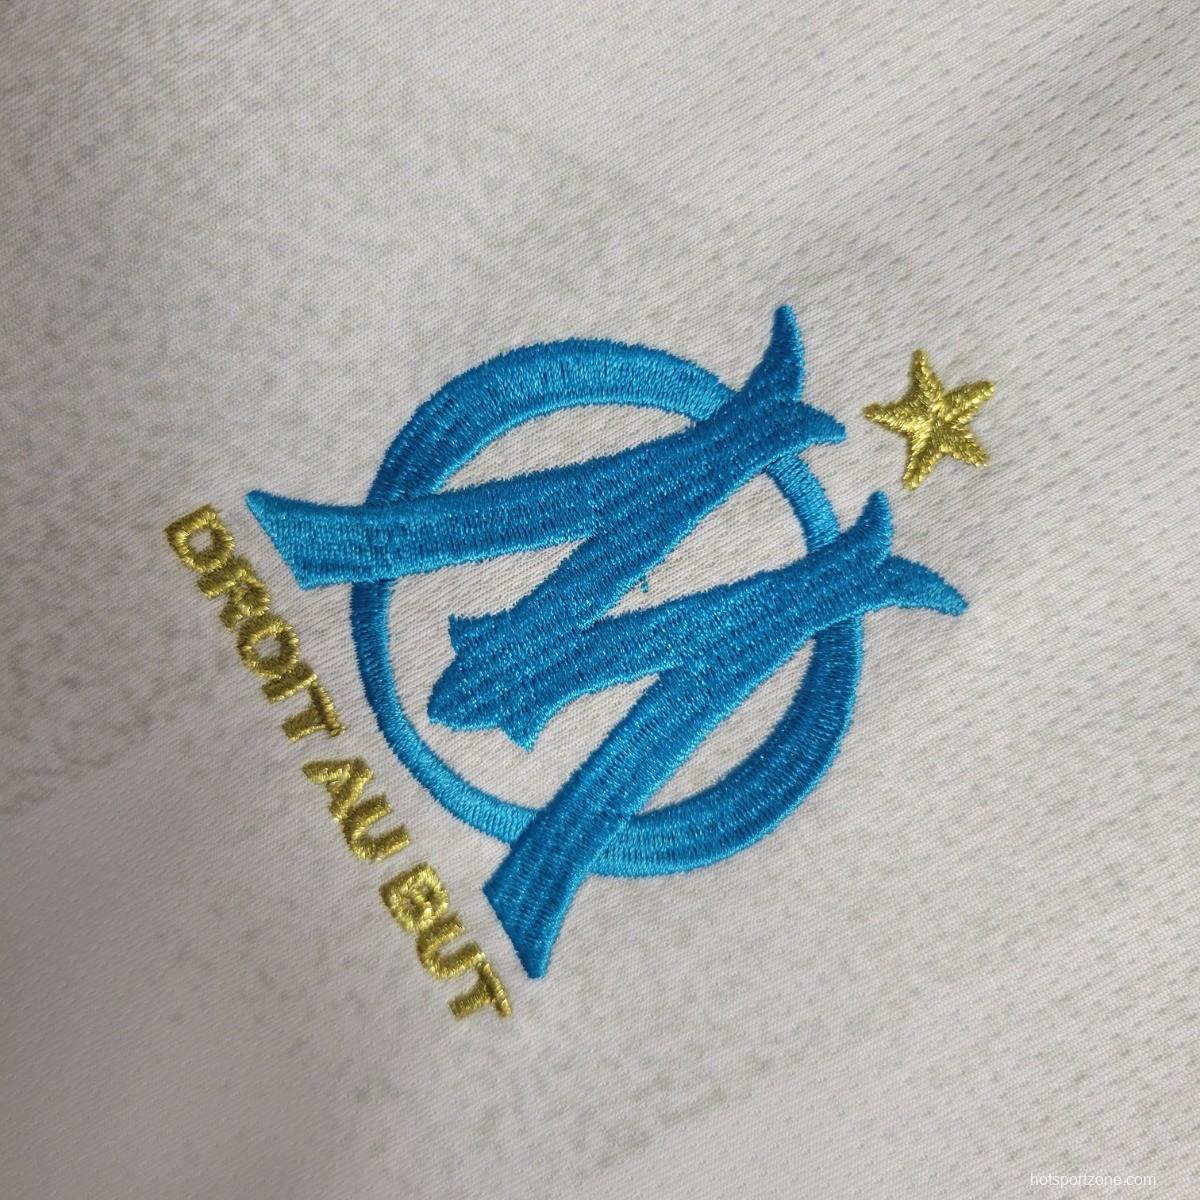 23/24 Olympique Marseille Home Jersey